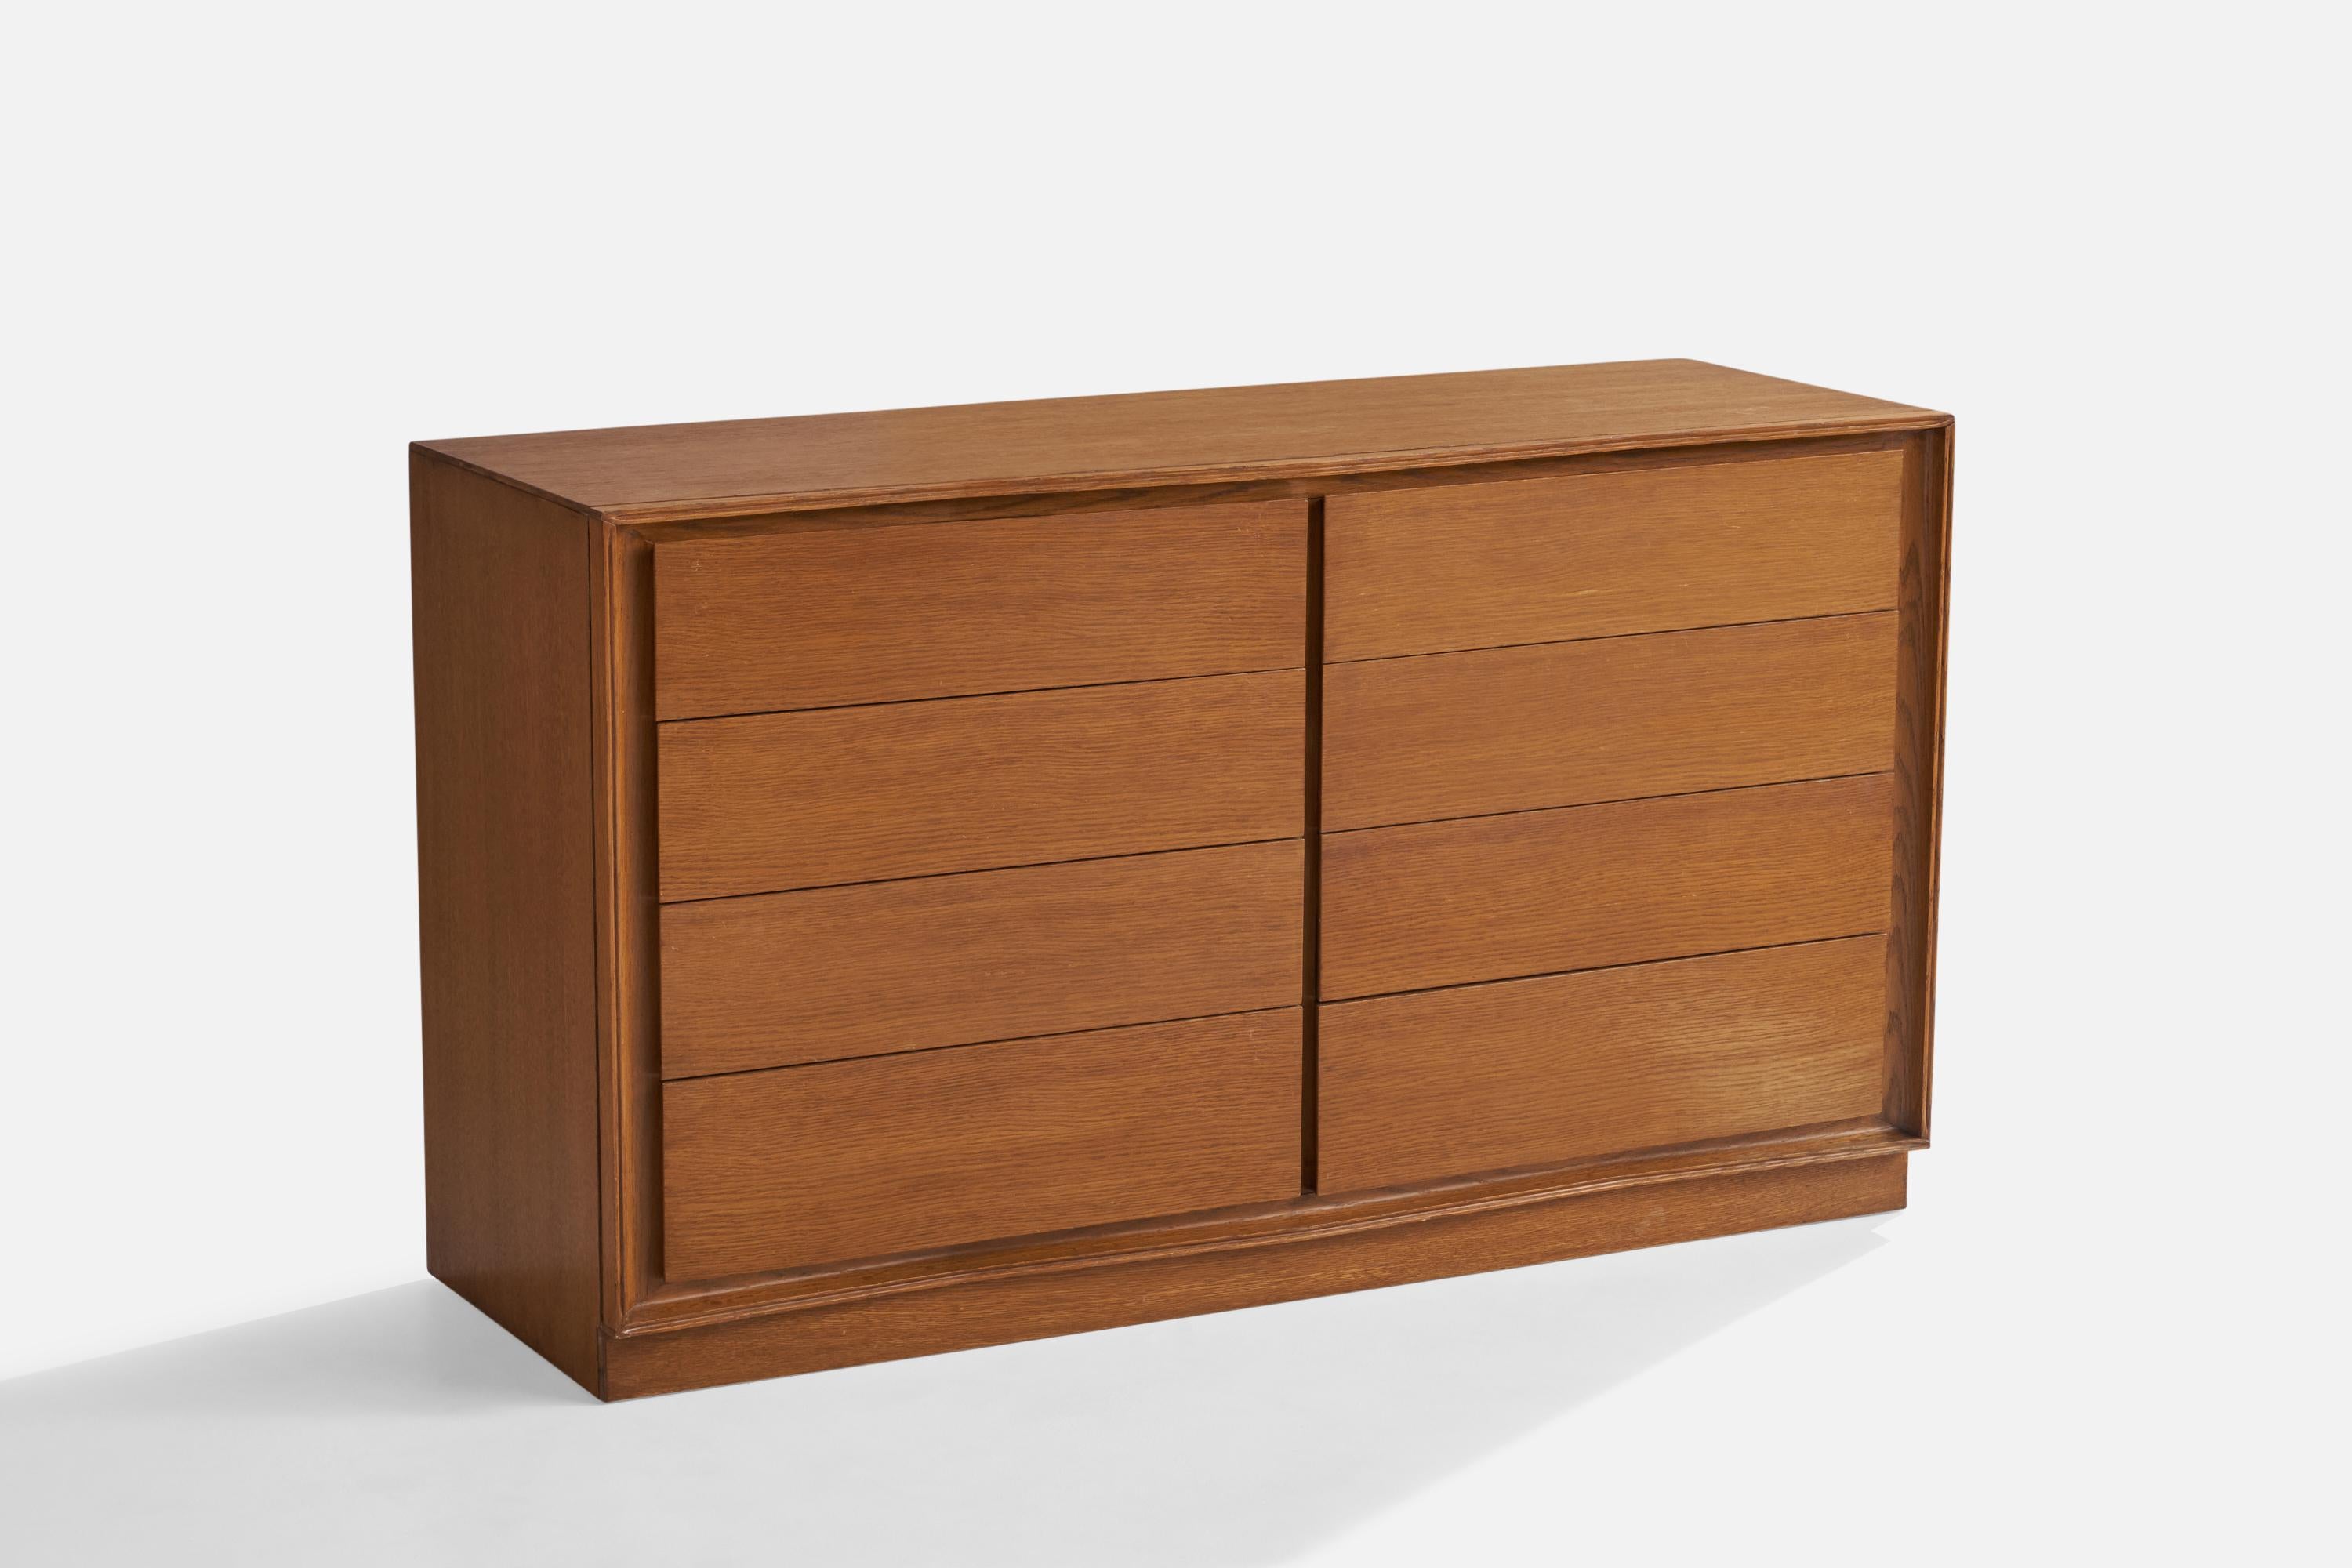 An oak dresser designed by Raymond Loewy and produced by Mengel Furniture Co, USA, 1950s.